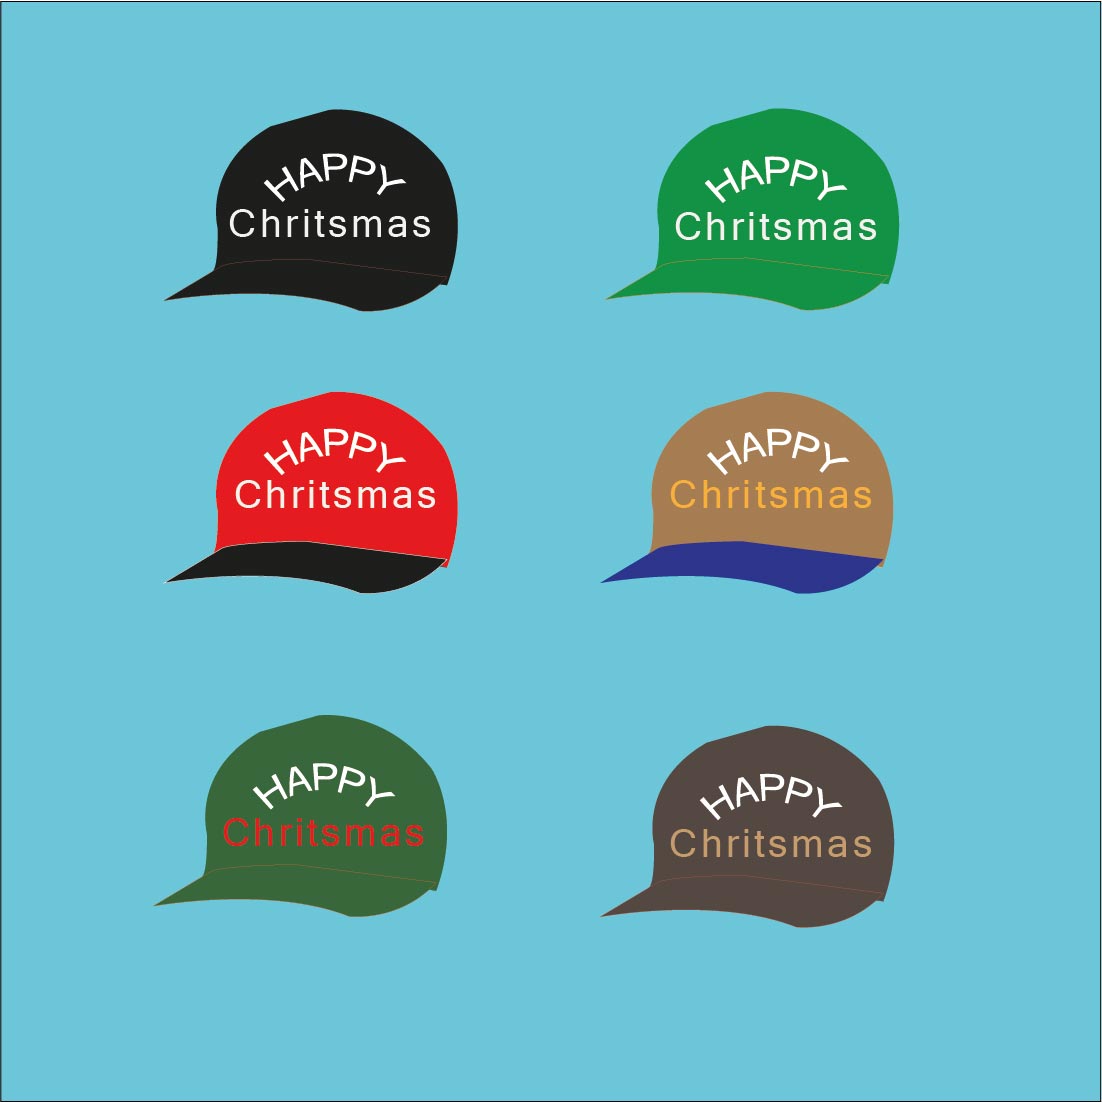 Christmas Caps cover image.